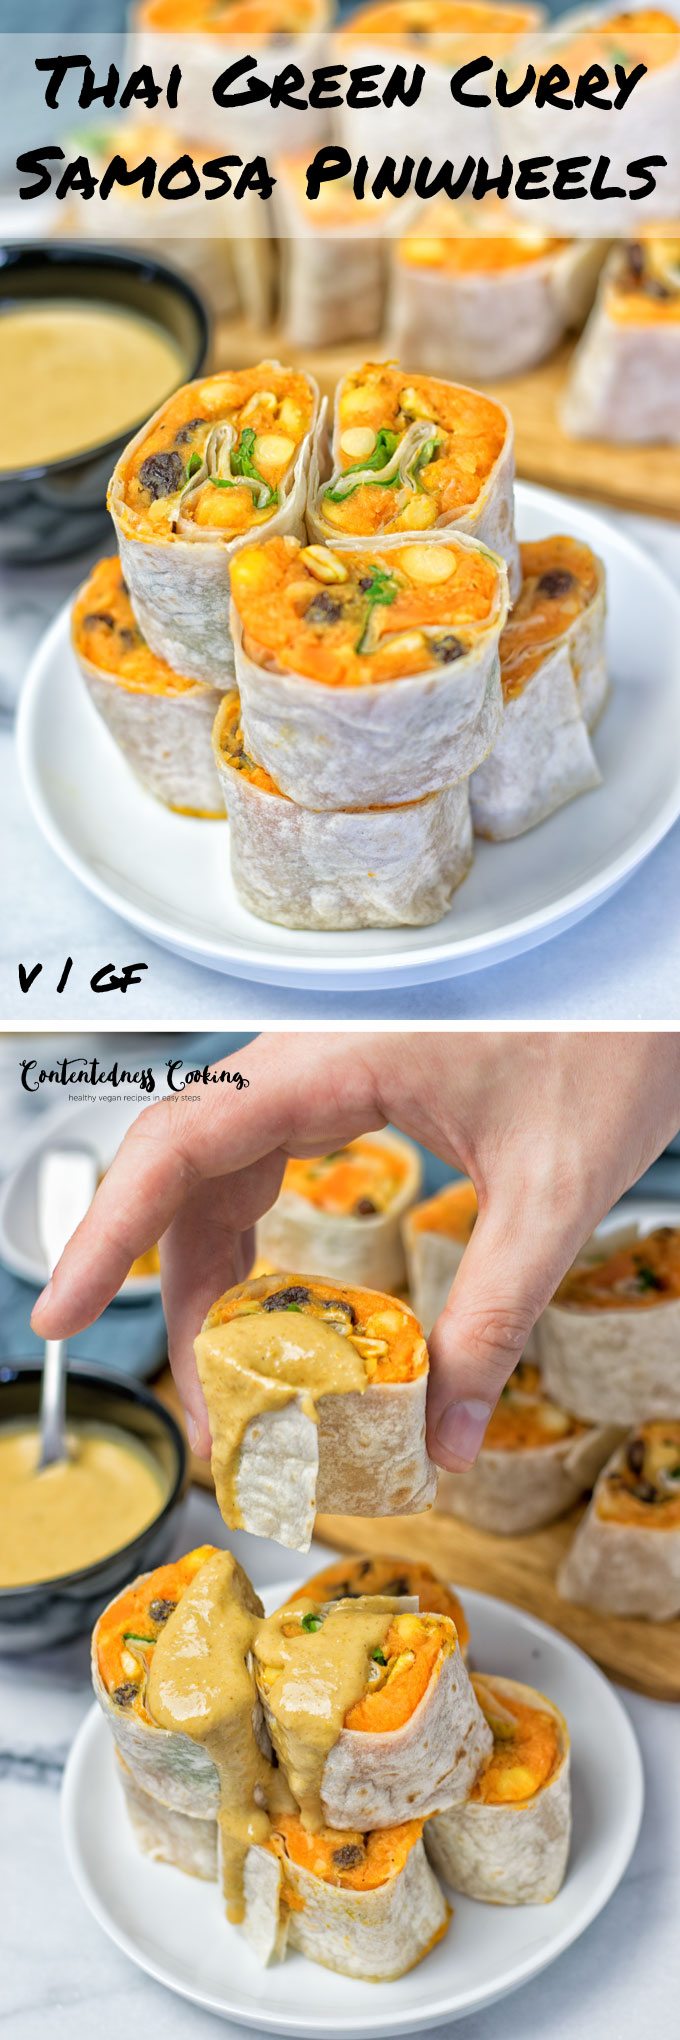 Collage of two picture of the Thai Green Curry Samosa Pinwheels with recipe title text.